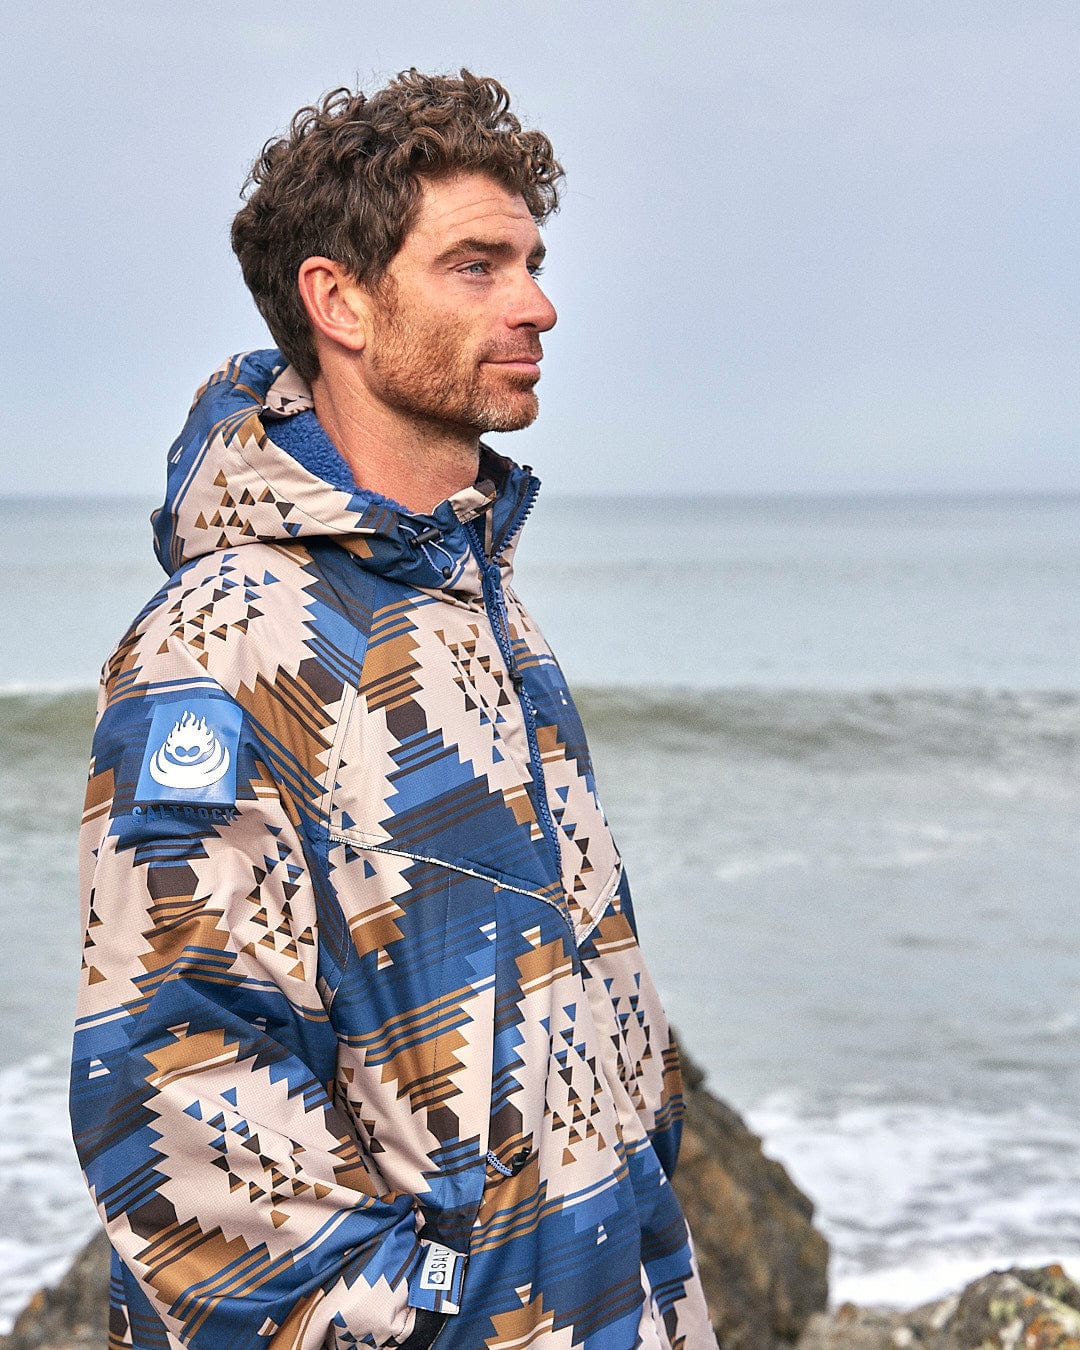 A man wearing a blue and brown Saltrock Four Seasons Changing Robe - Aztec print jacket standing on rocks near the ocean.